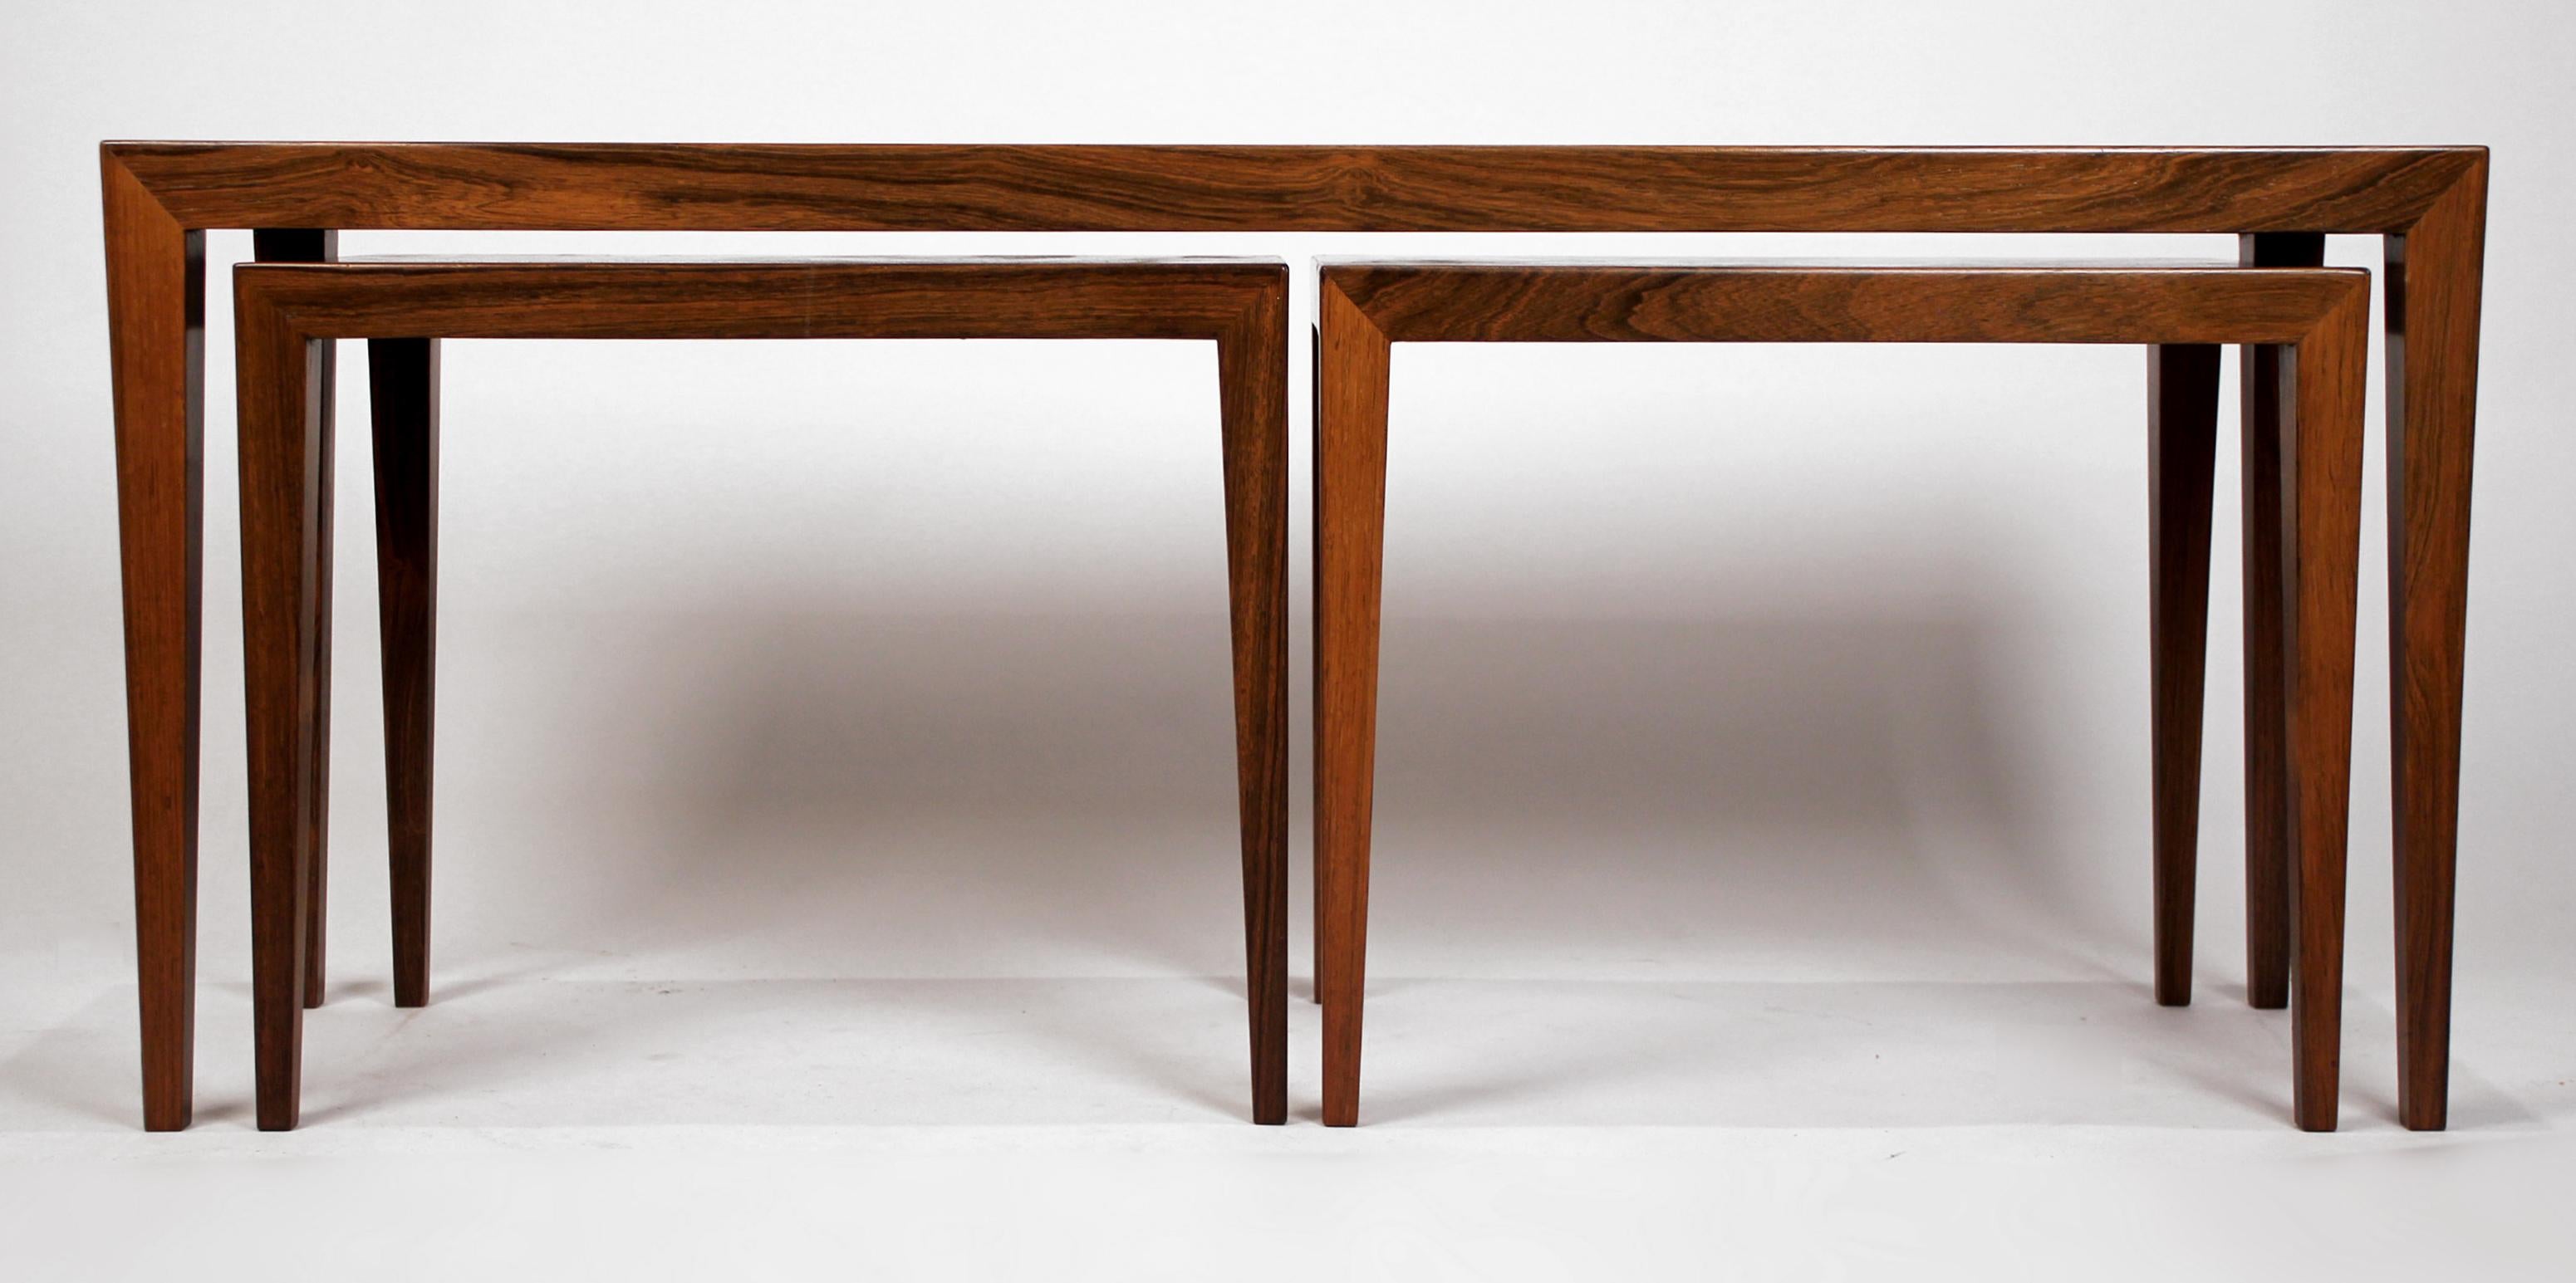 A trio of rosewood tables by Scandinavian master Severin Hansen. The large table could serve as a coffee table and the smaller tables as drink or tv tables. The smaller tables have a stunning book-matched rosewood veneer.

The measurement listed is